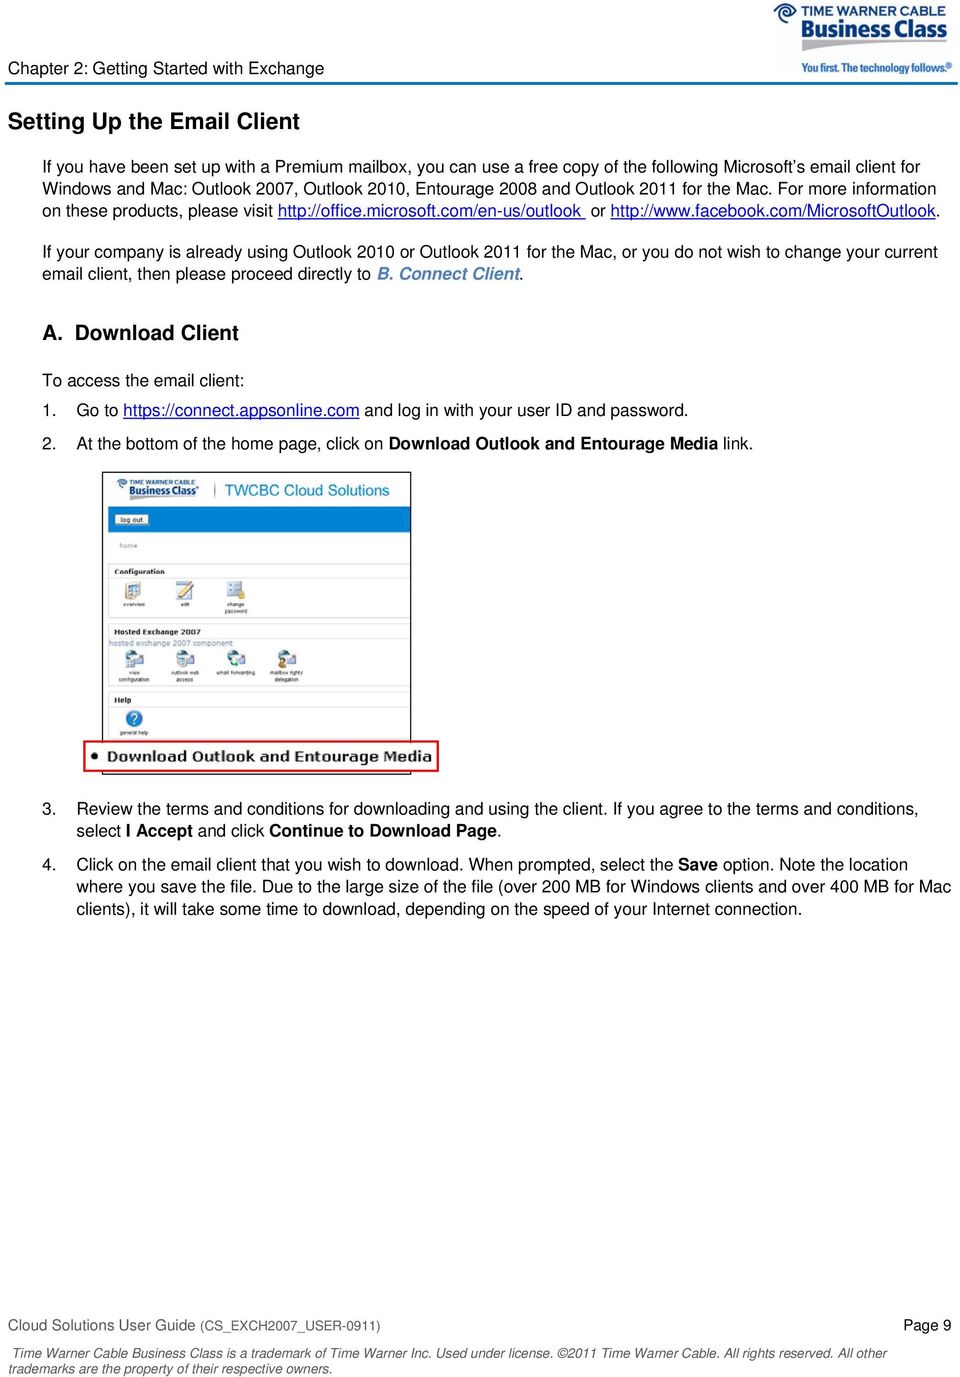 If your company is already using Outlook 2010 or Outlook 2011 for the Mac, or you do not wish to change your current email client, then please proceed directly to B. Connect Client. A.